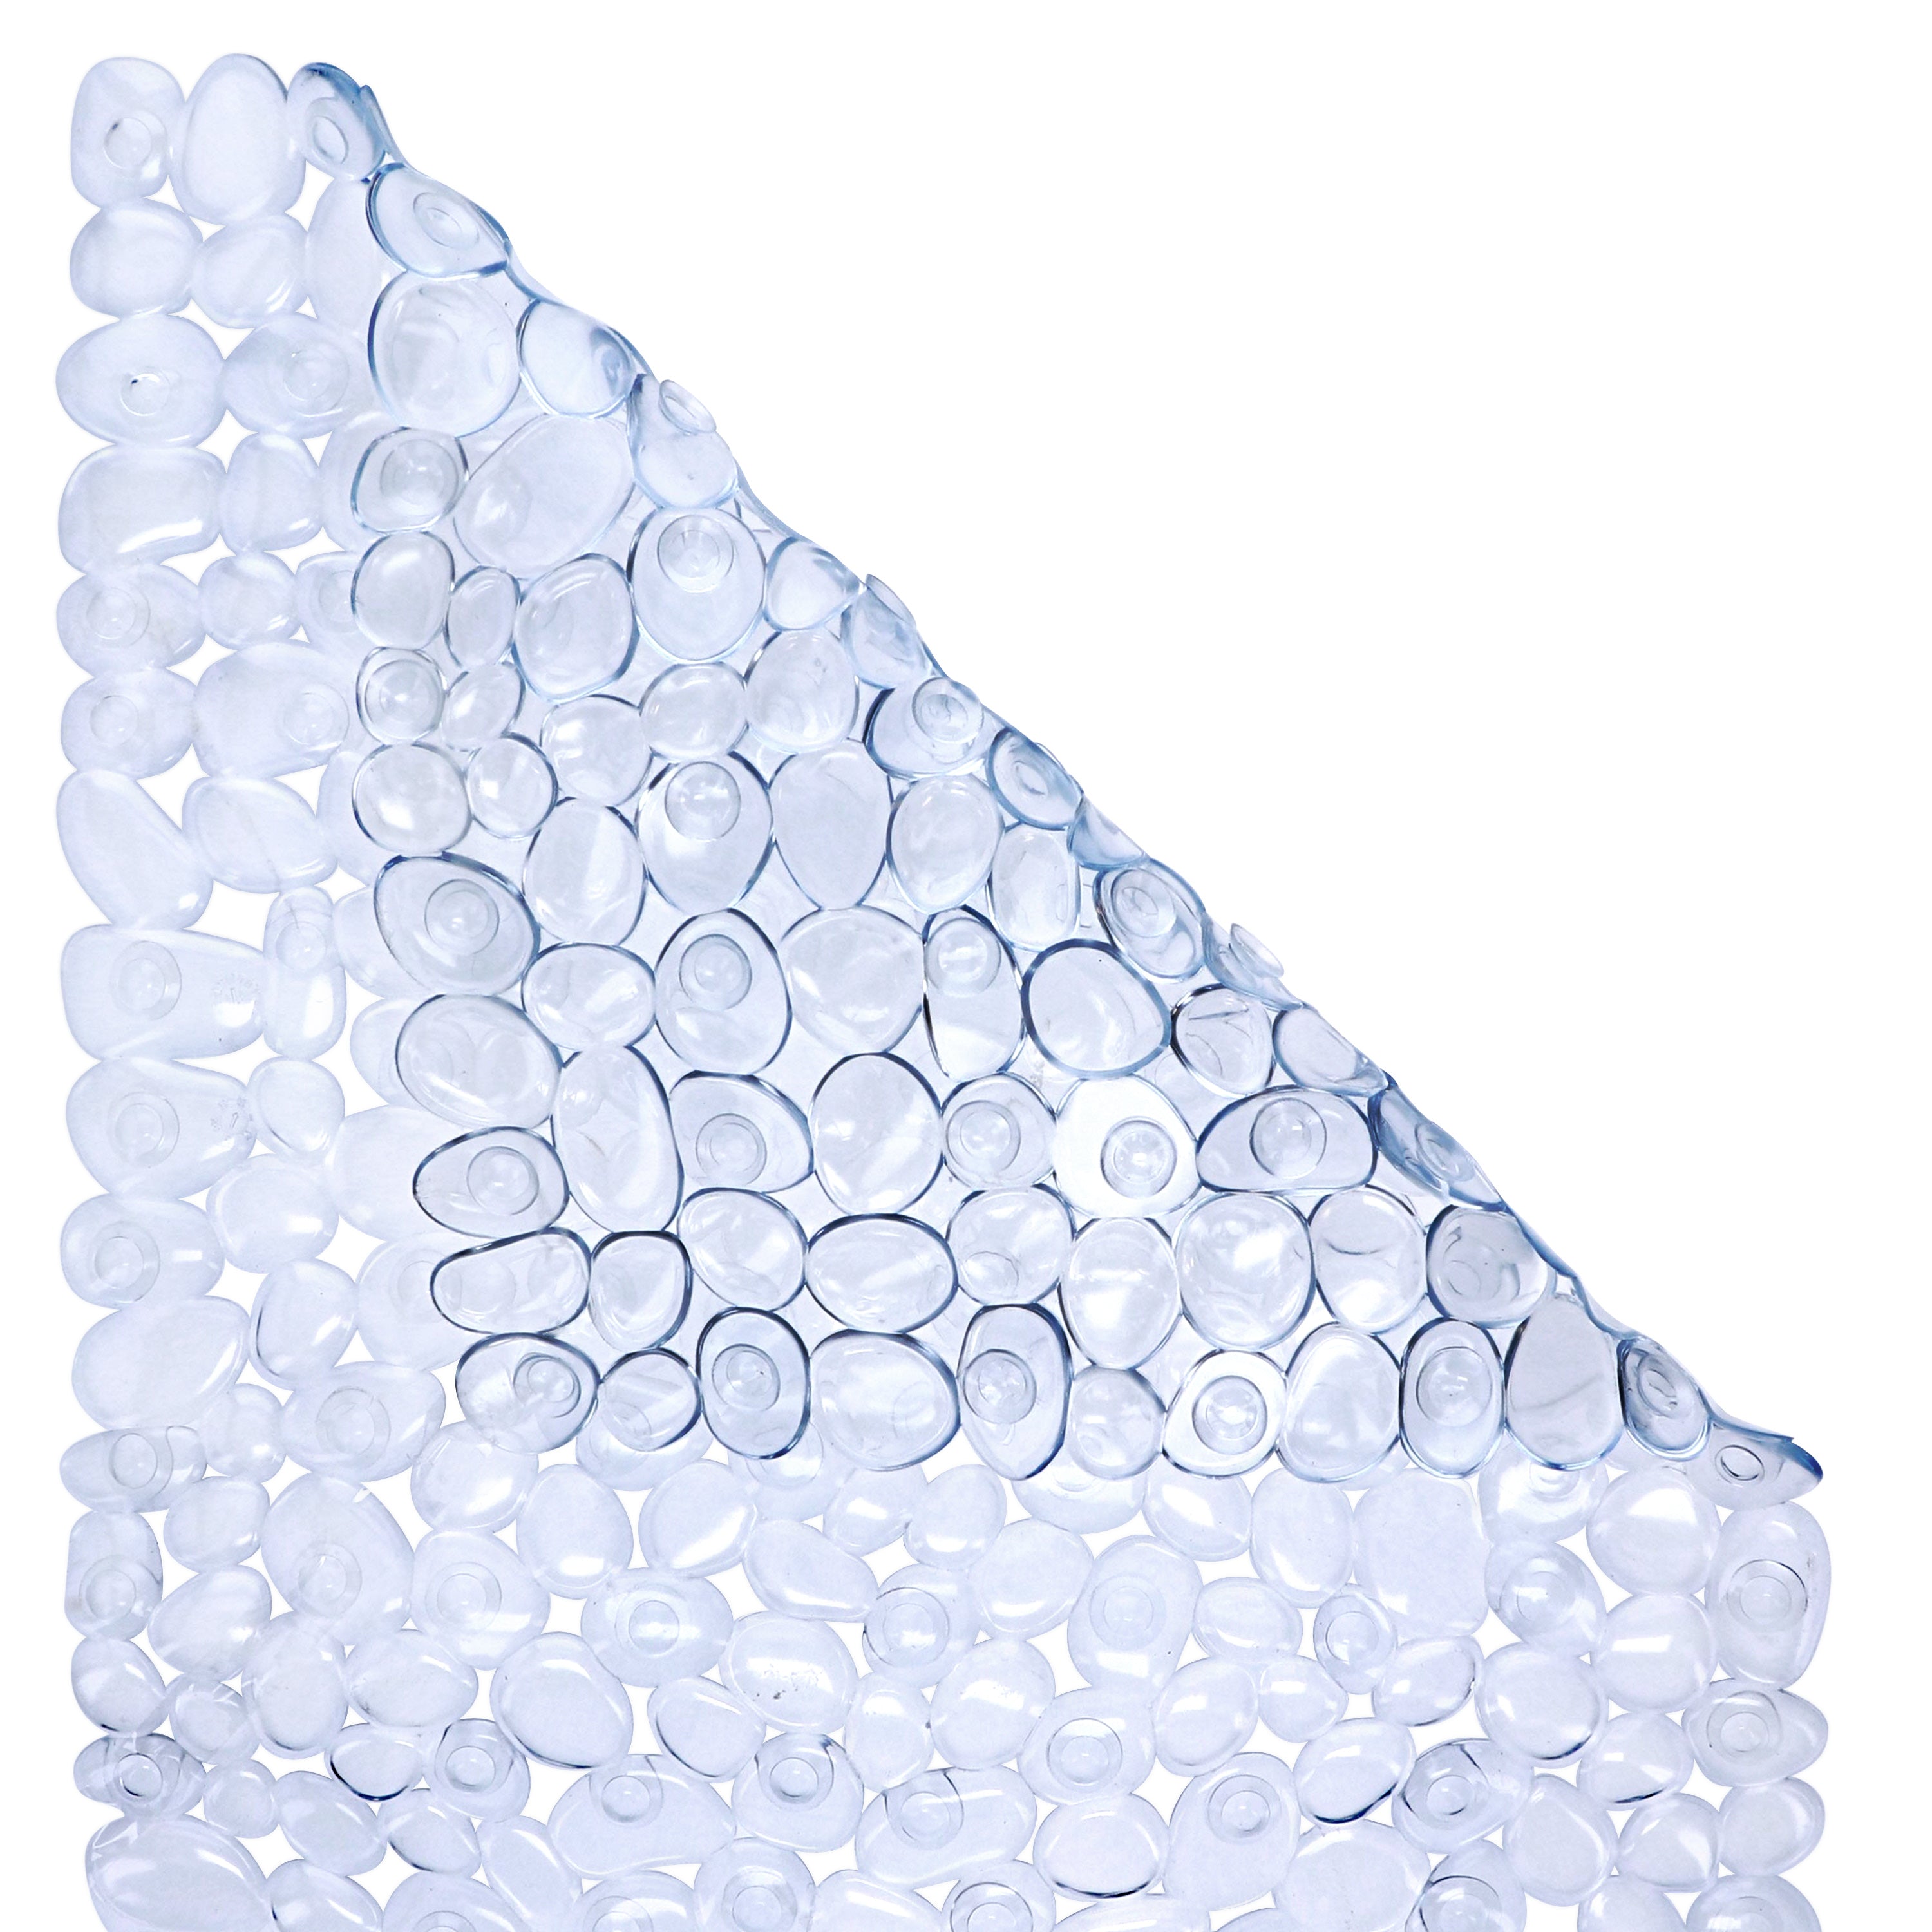 Home+Solutions Clear Oval Bubble Bath Mat, 27.5x15 – Ginsey Home